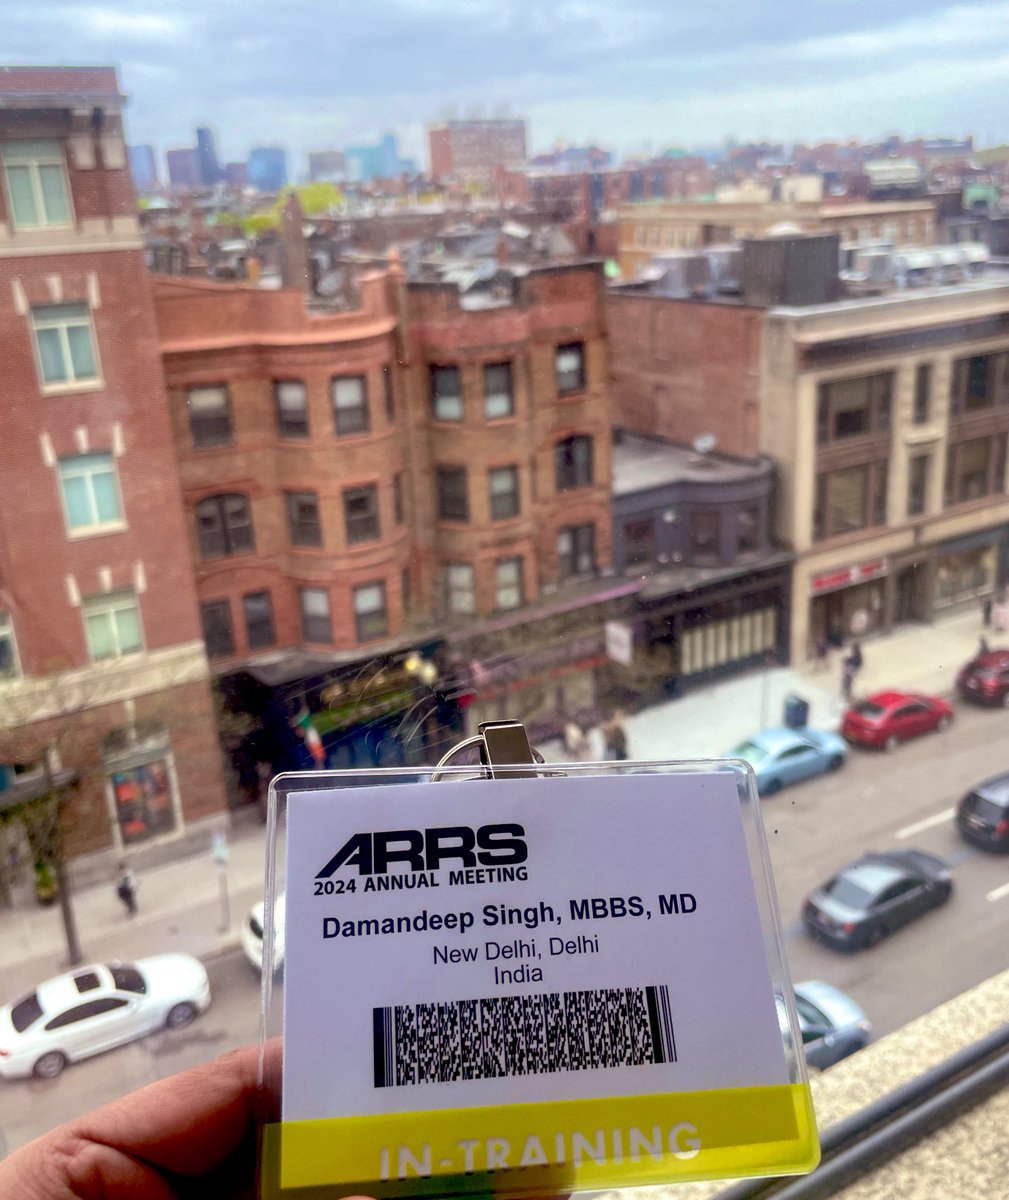 Boston and ARRS! 
Ideal combination for cutting edge educational program!
@ARRS_Radiology  #ARRS24 
See you at ITR!